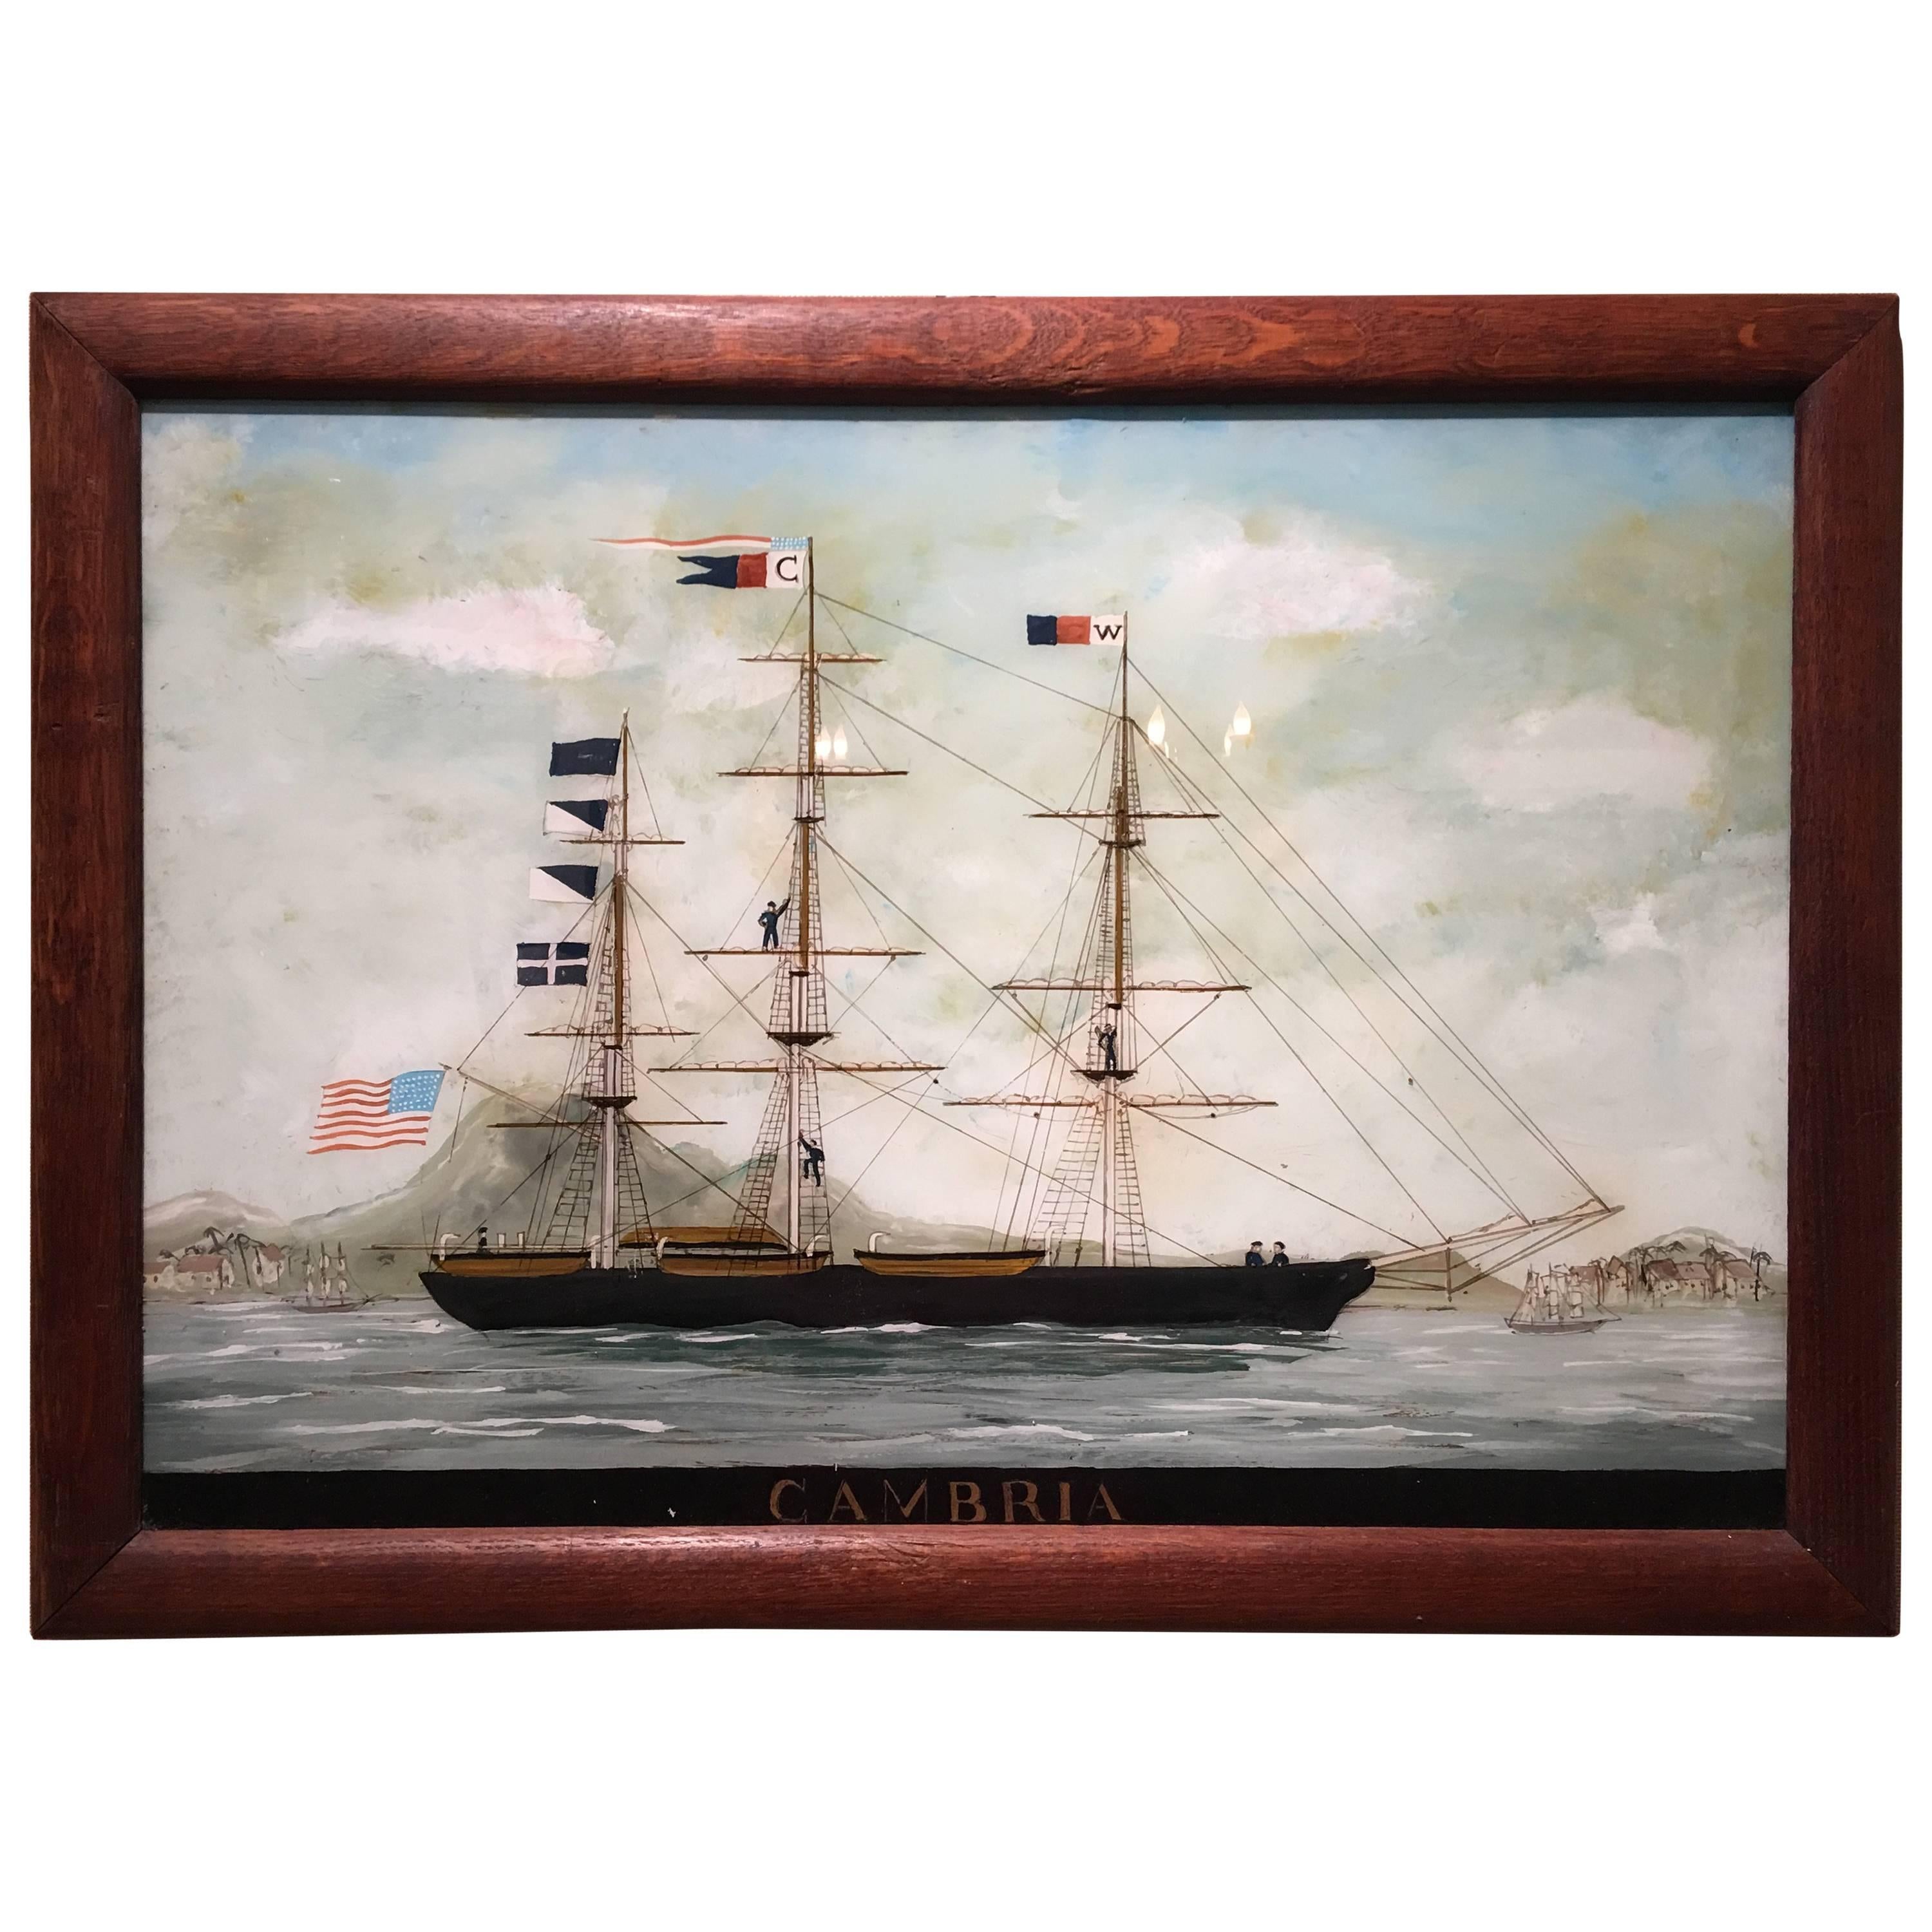 Reverse Glass Painting of a Ship "Cambria", 19th Century